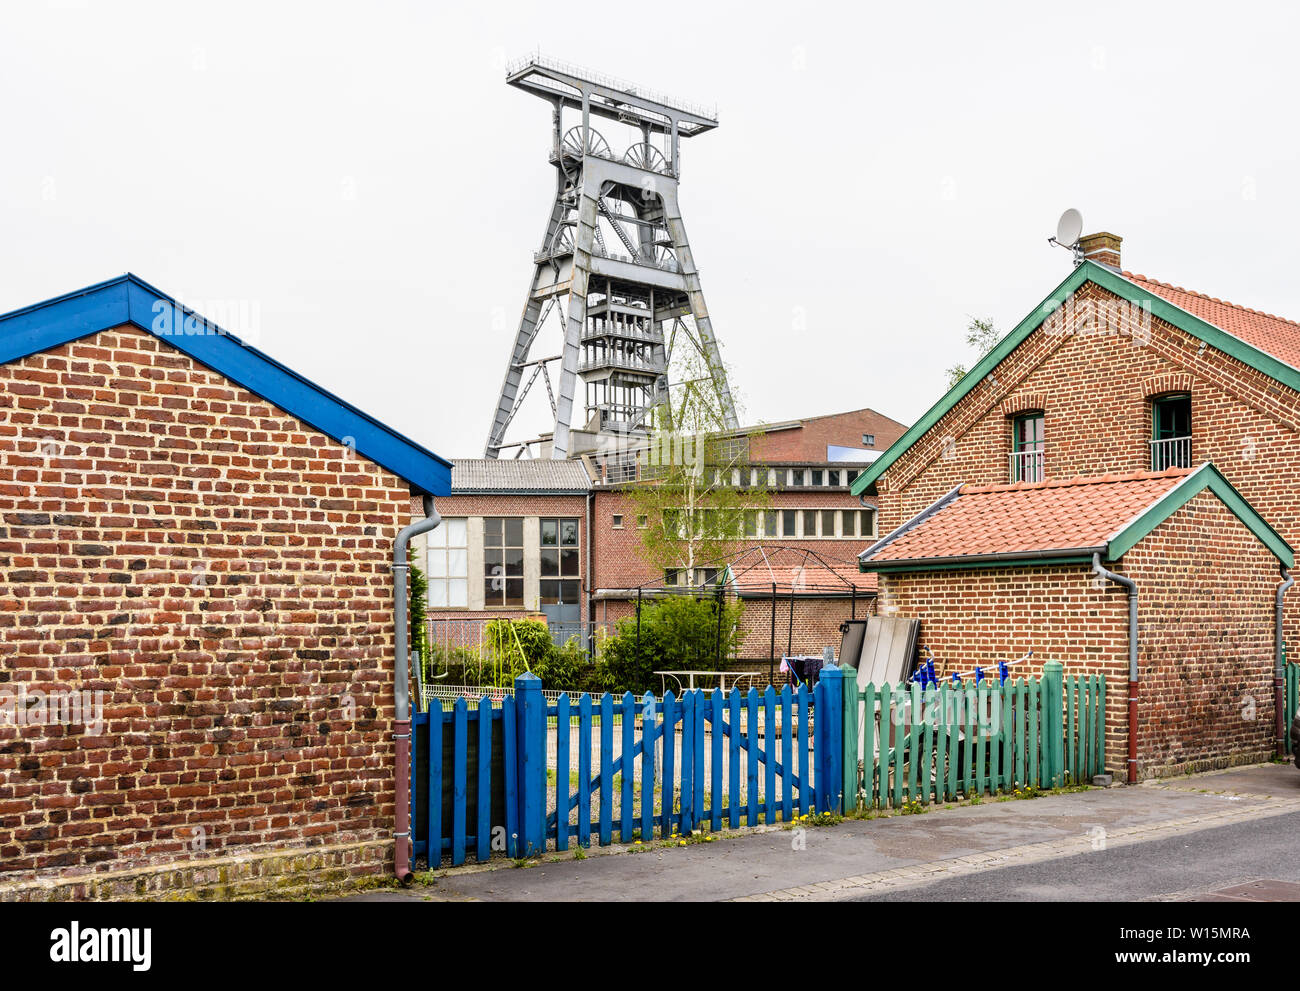 The former miners' housing next to the Arenberg pit are modest, semi-detached, brick houses typical from the Nord-Pas de Calais mining basin, France. Stock Photo